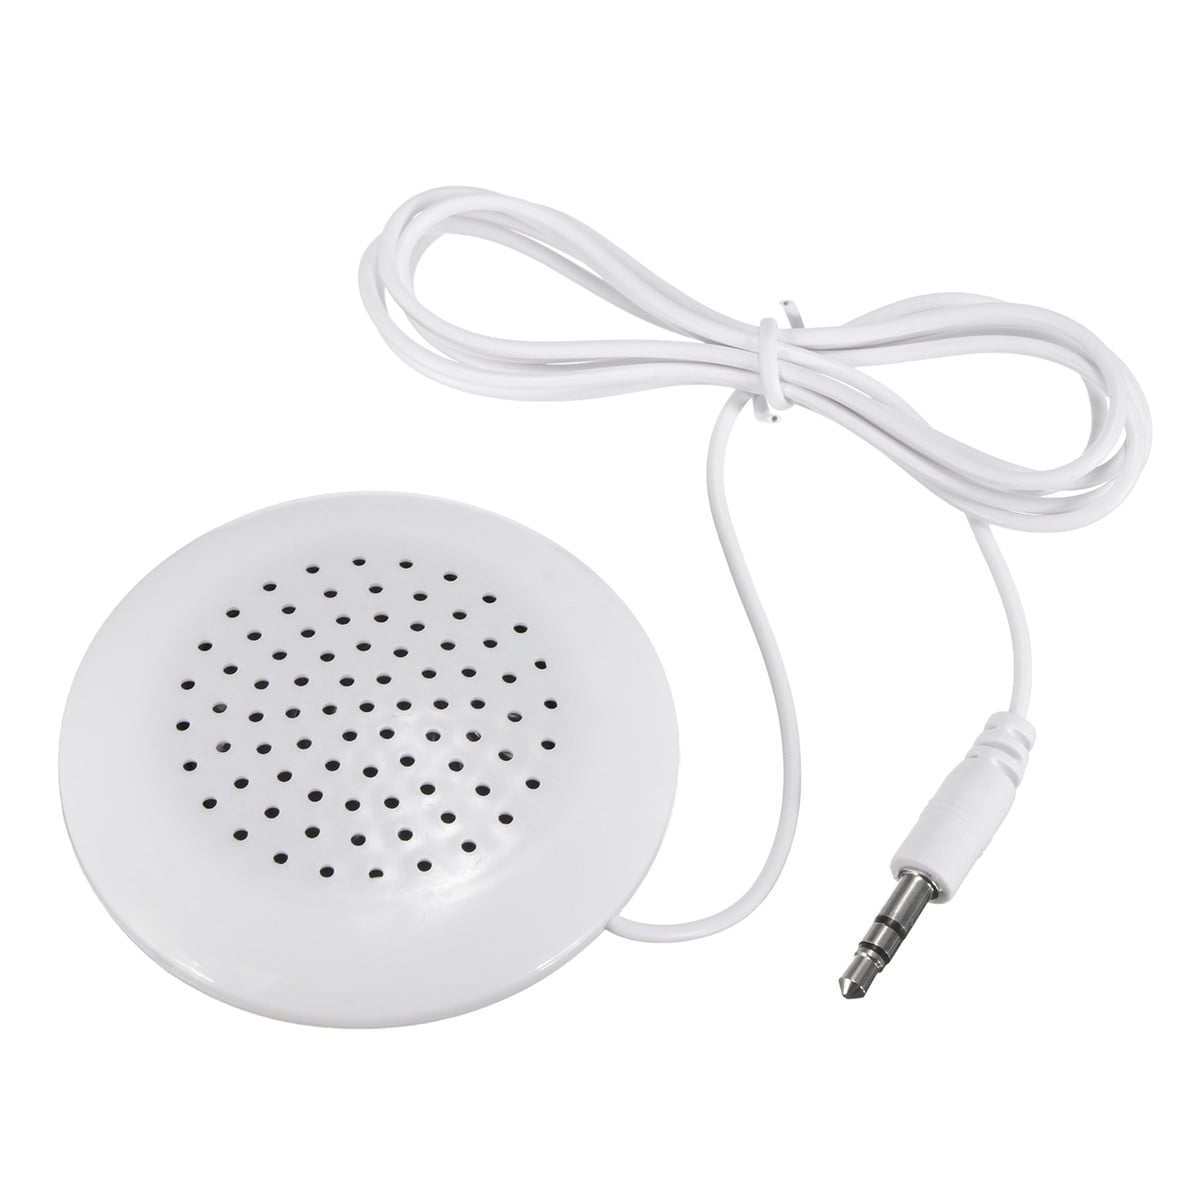 Portable 3.5mm Pillow Sound Speaker For MP3 MP4 Music Player CD iPod Phones